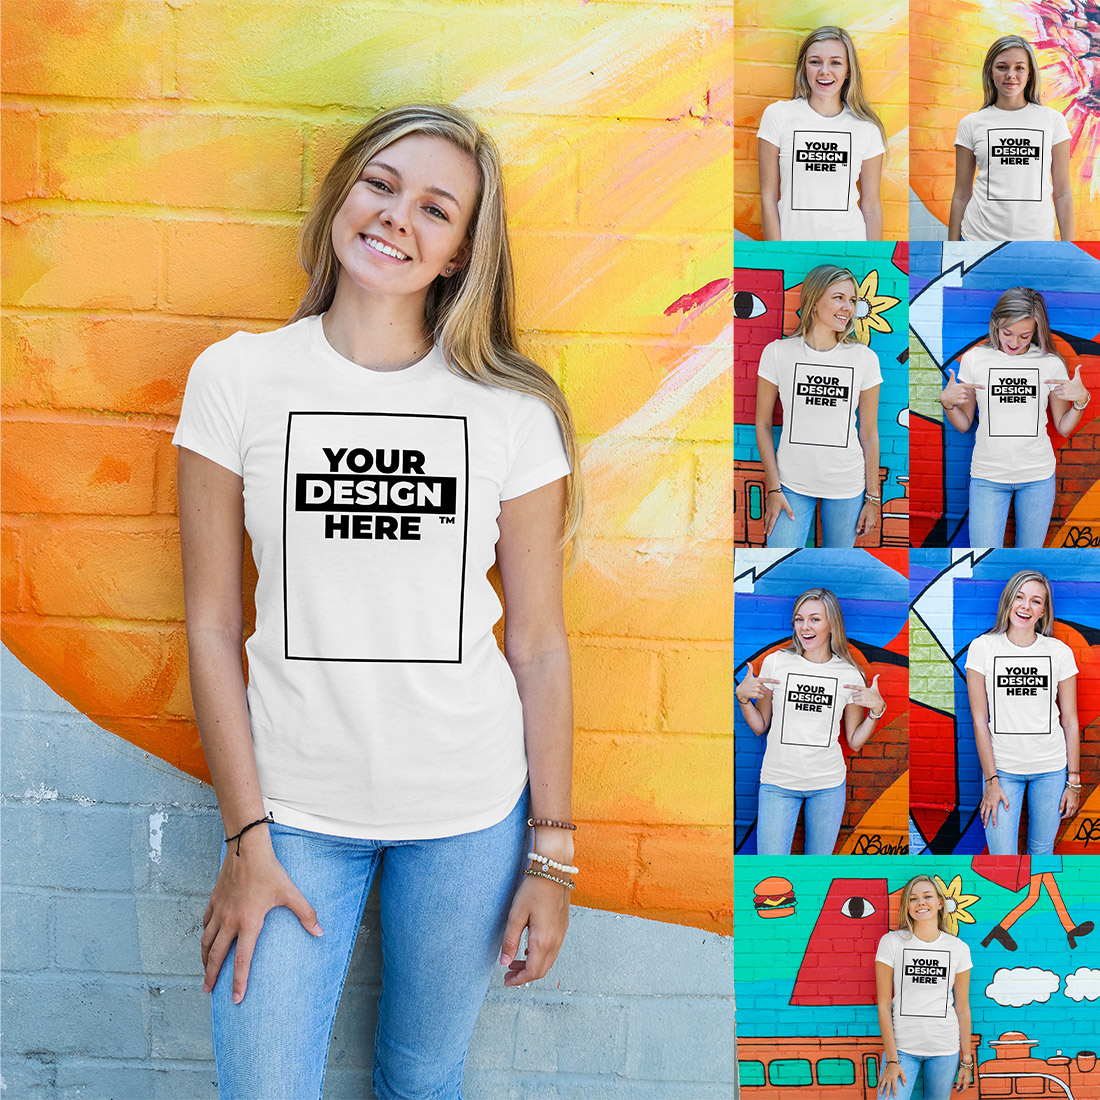 8 Mockups Of A Girl T-Shirt In Different Styles cover image.